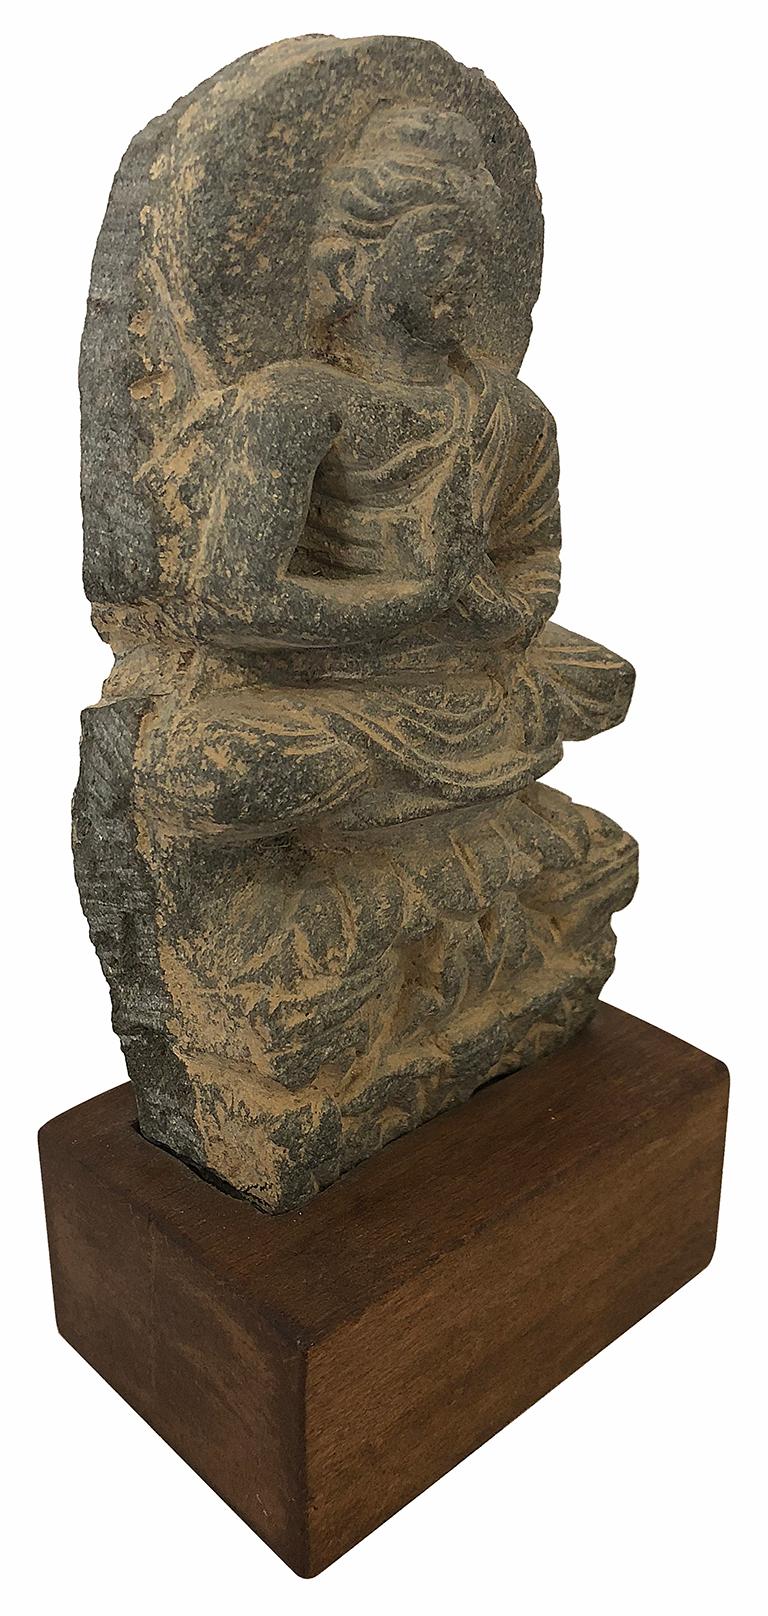  Buddha sitting in Lotus Throne in Dhyana Mudra with Halo - Sculpture by Unknown